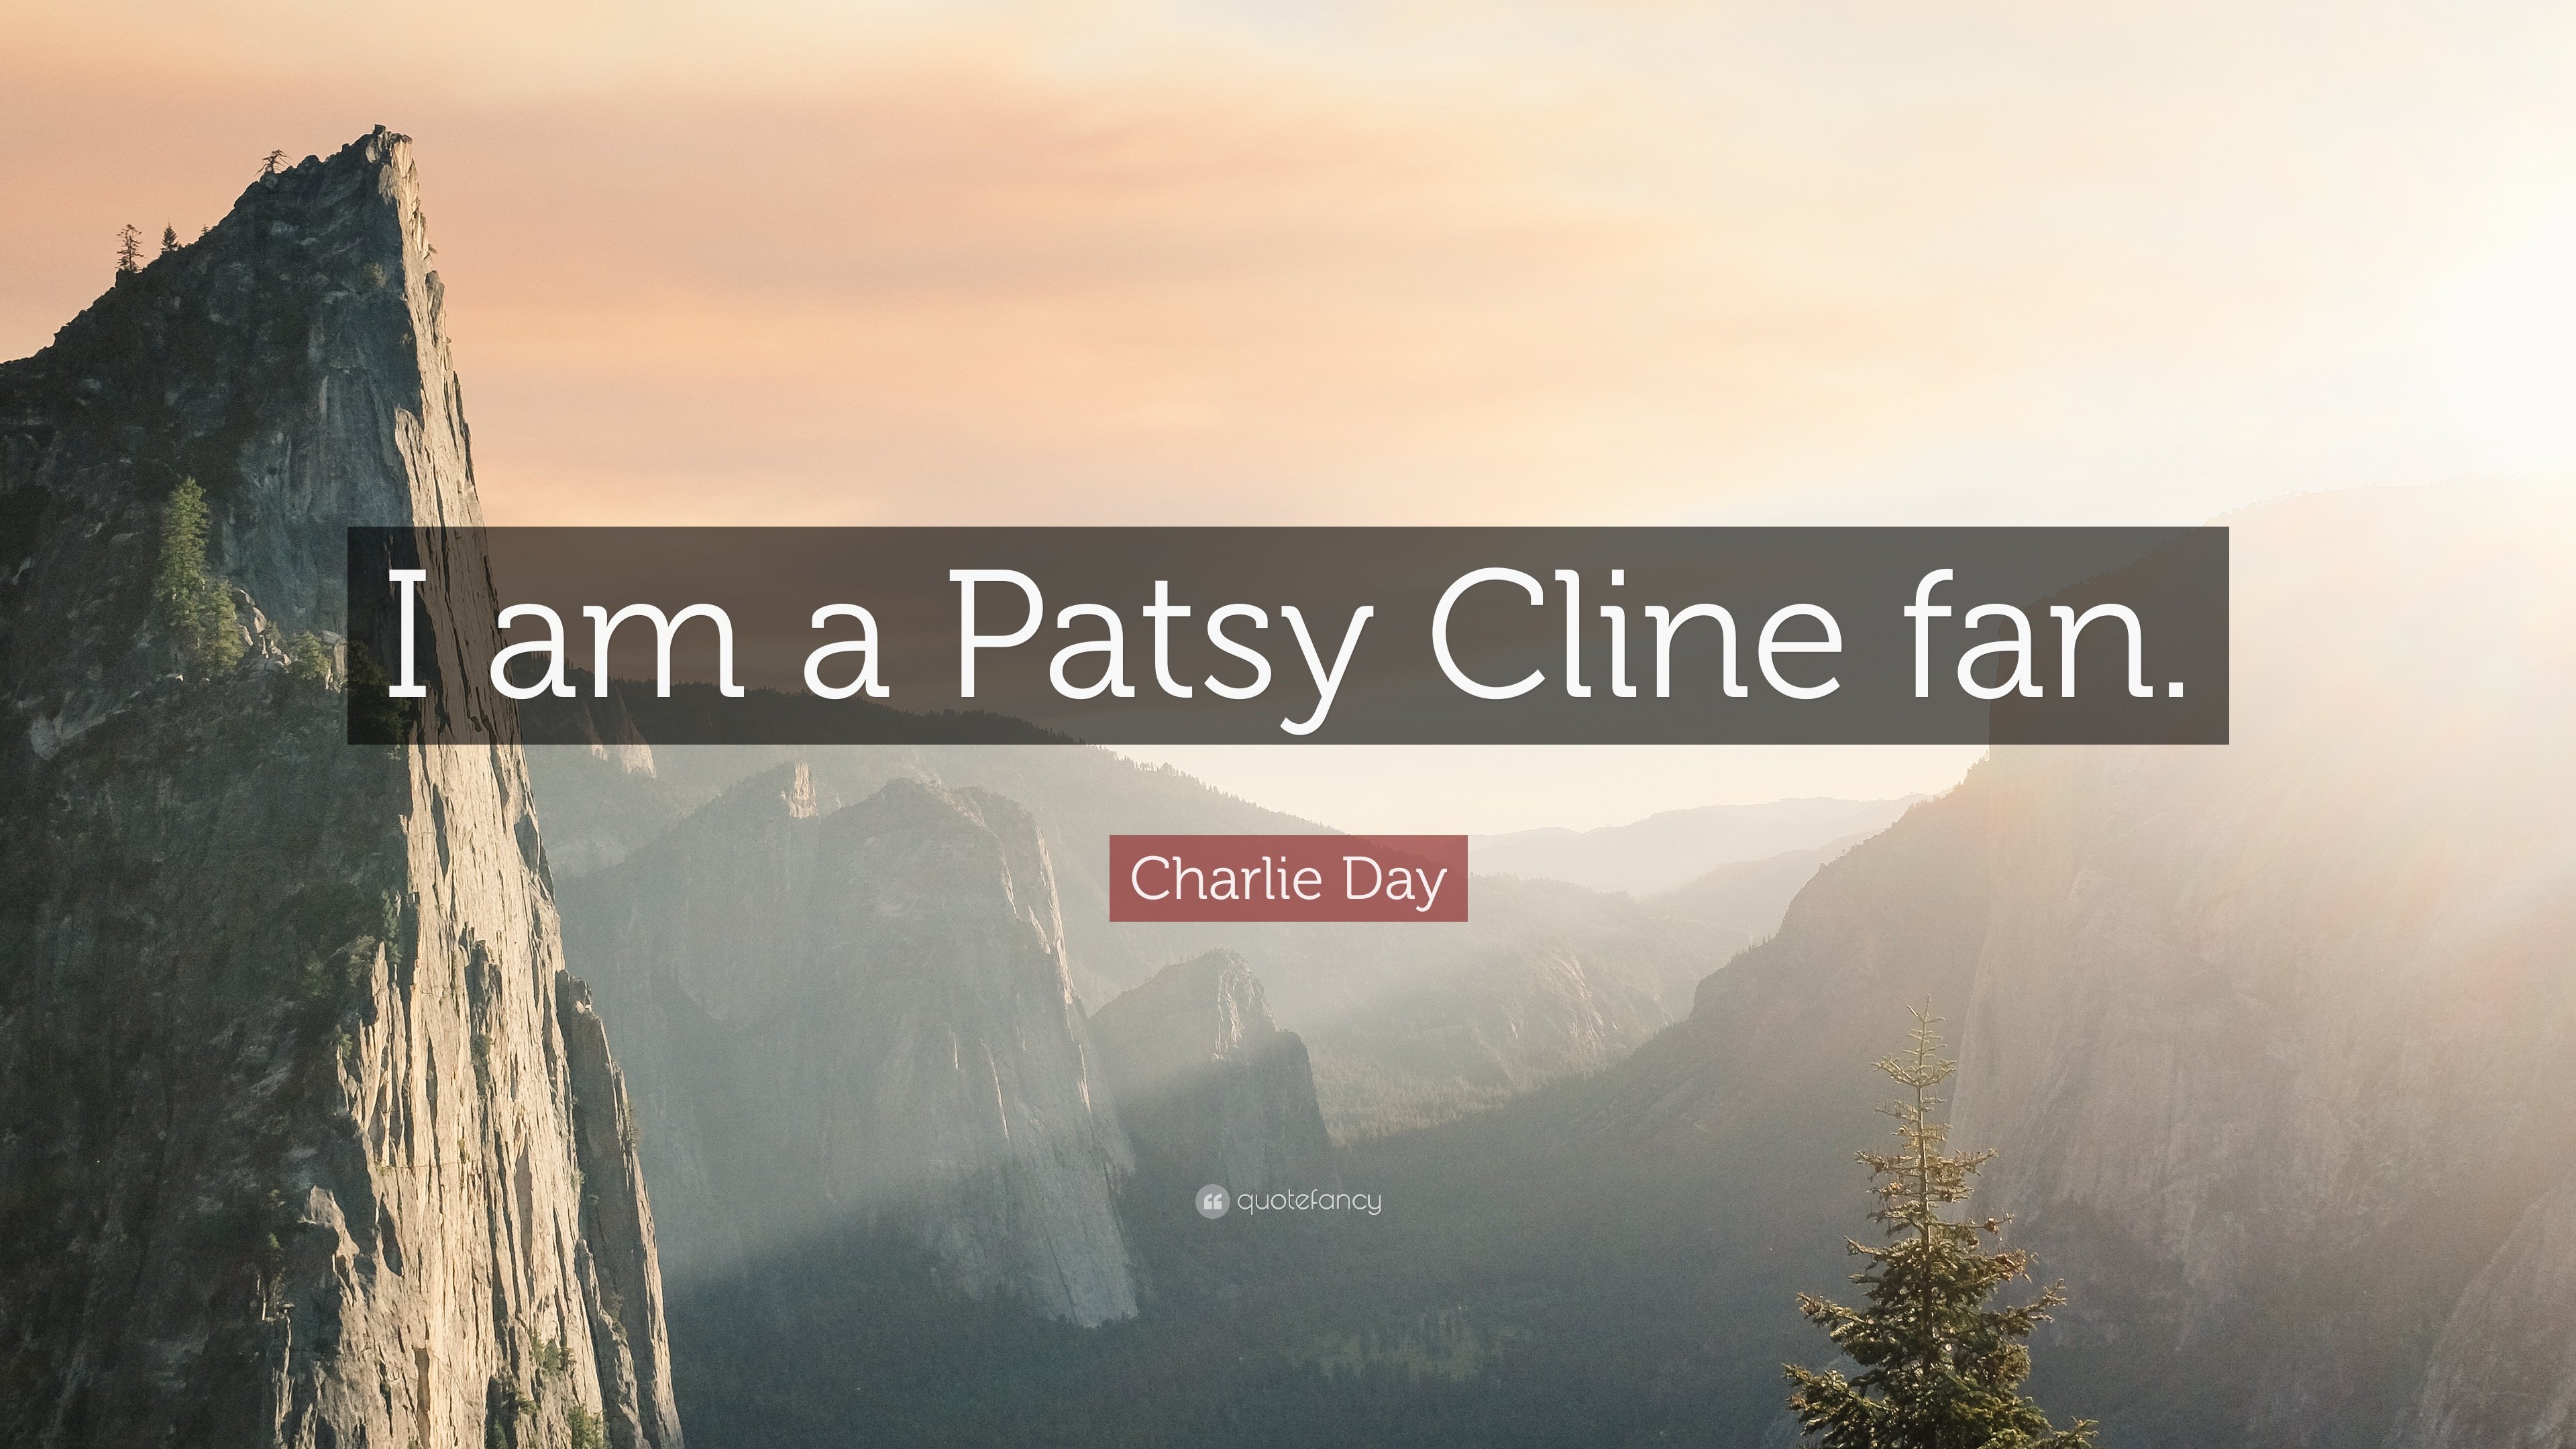 Charlie Day Quote: “I am a Patsy Cline fan.” (7 wallpaper)